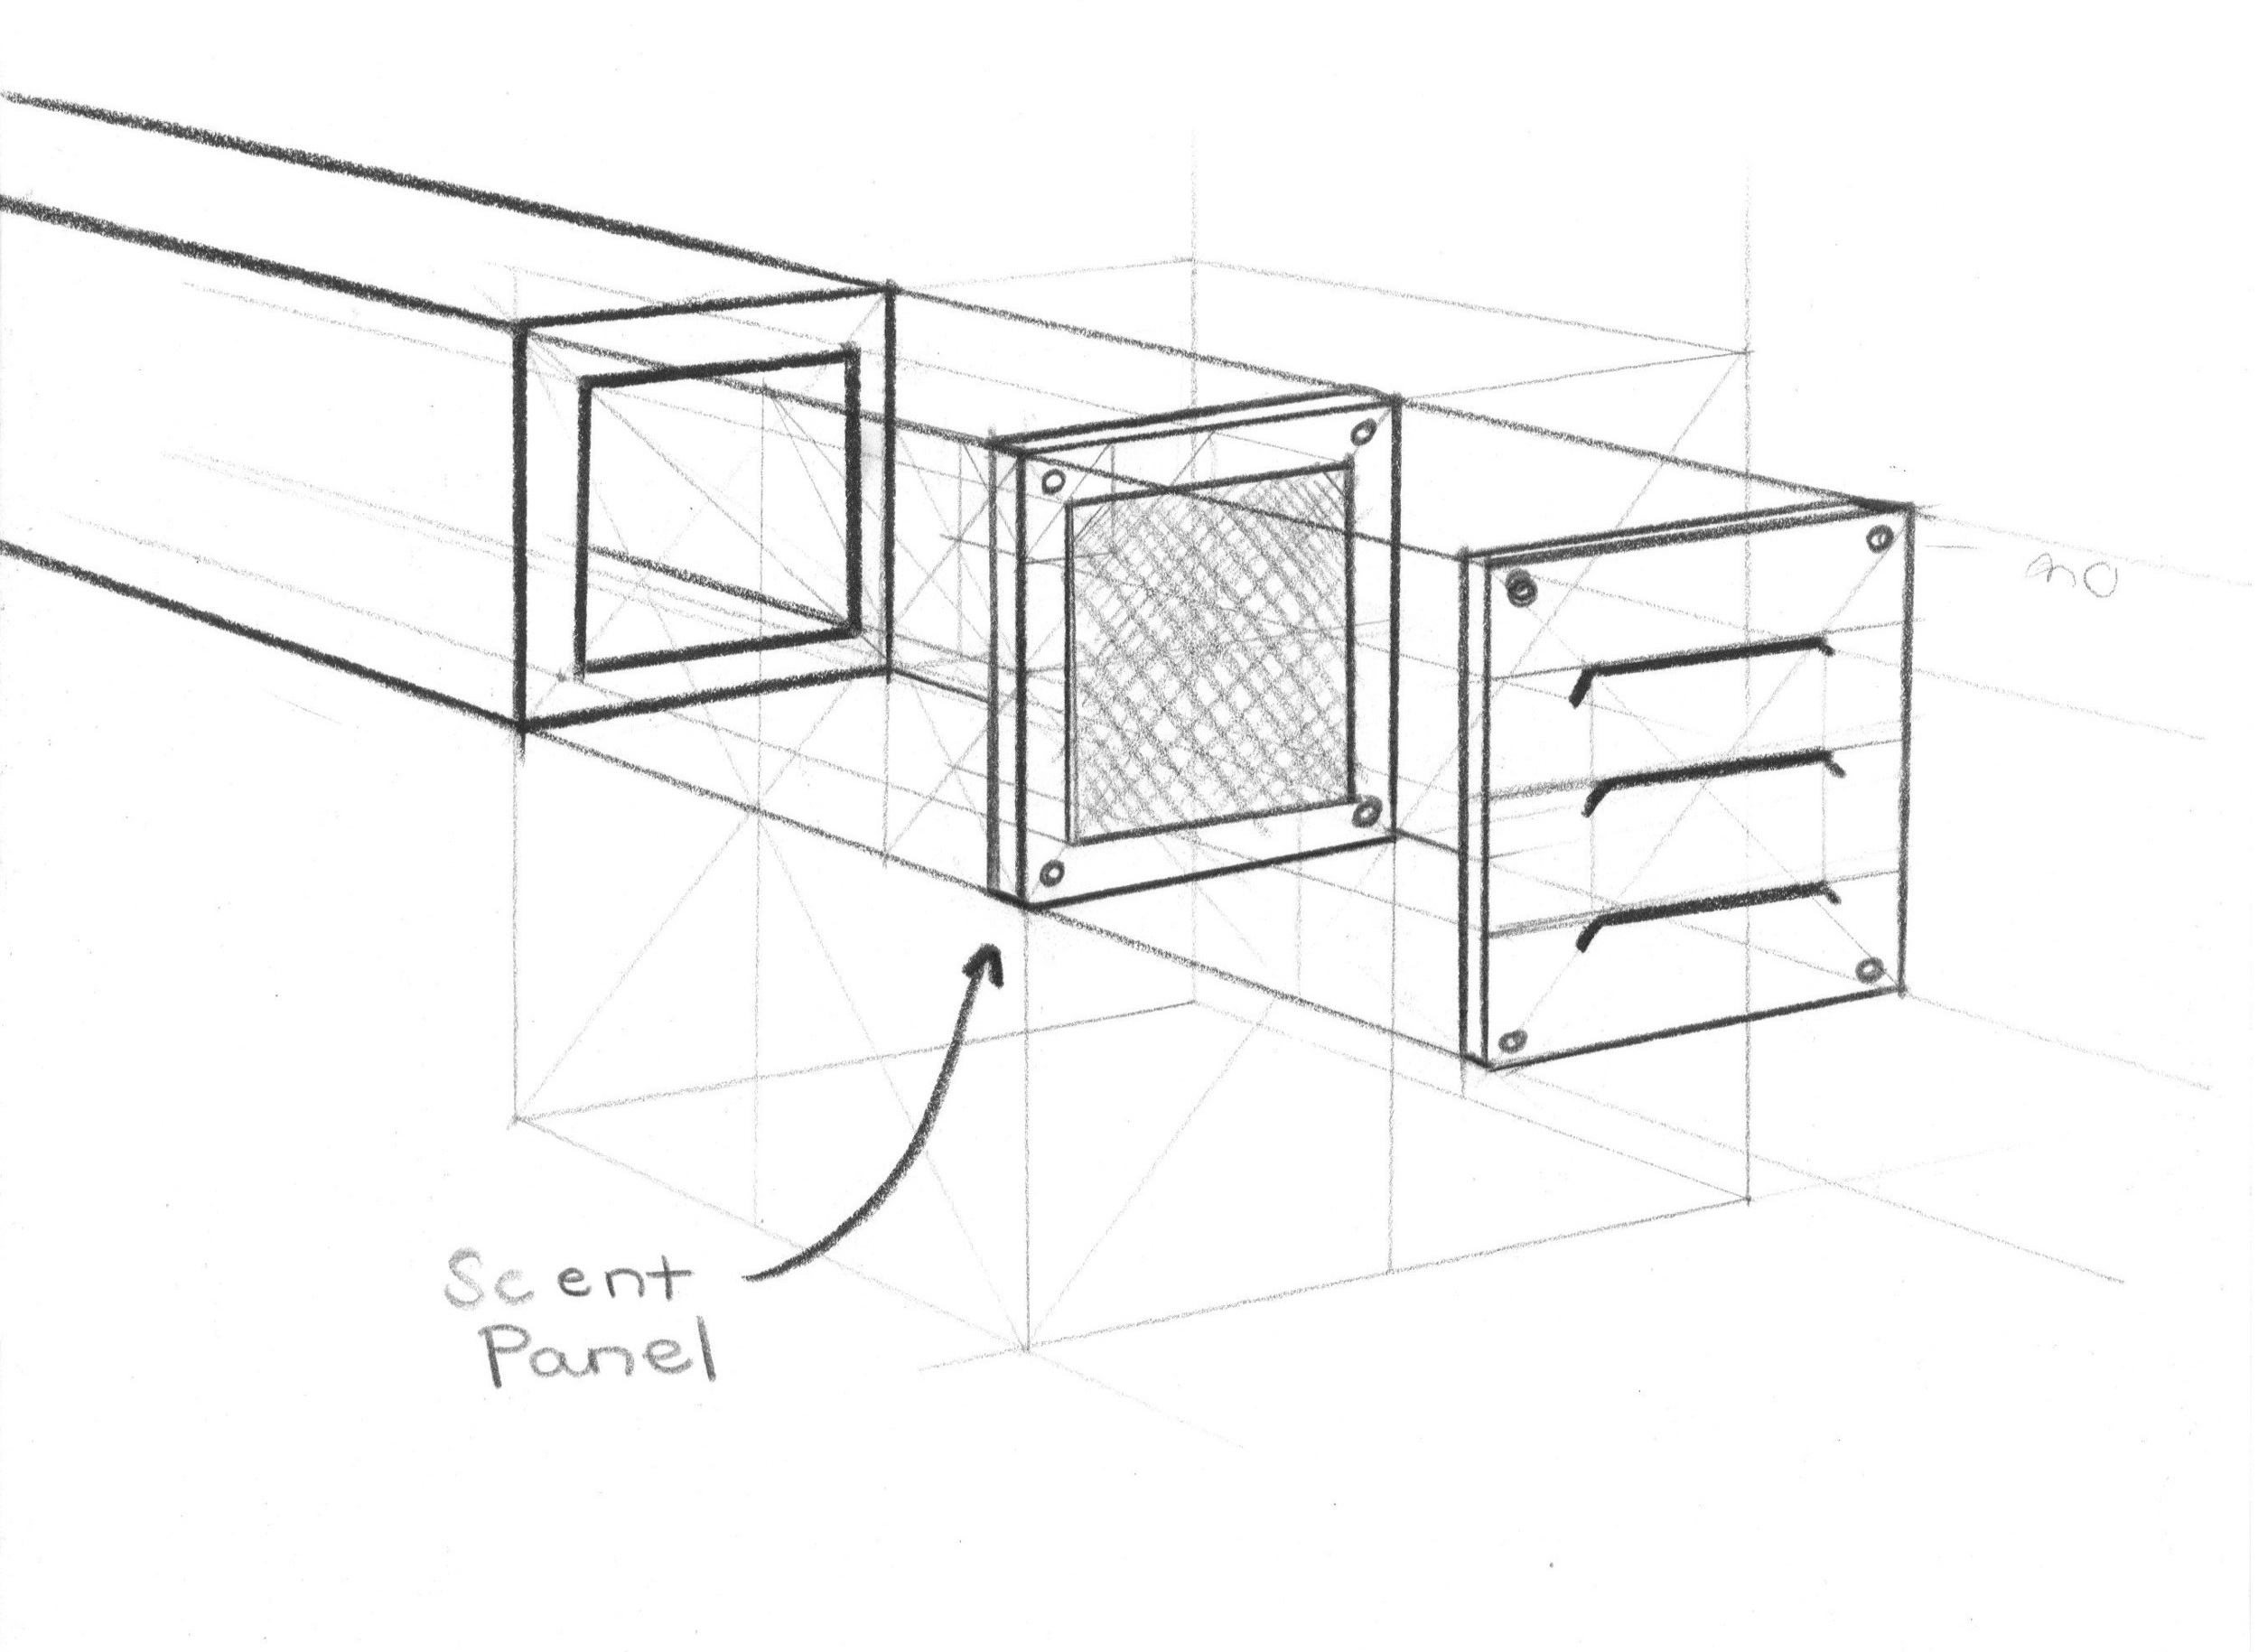 Augmented Smell Concept: Ventilation "Filter"